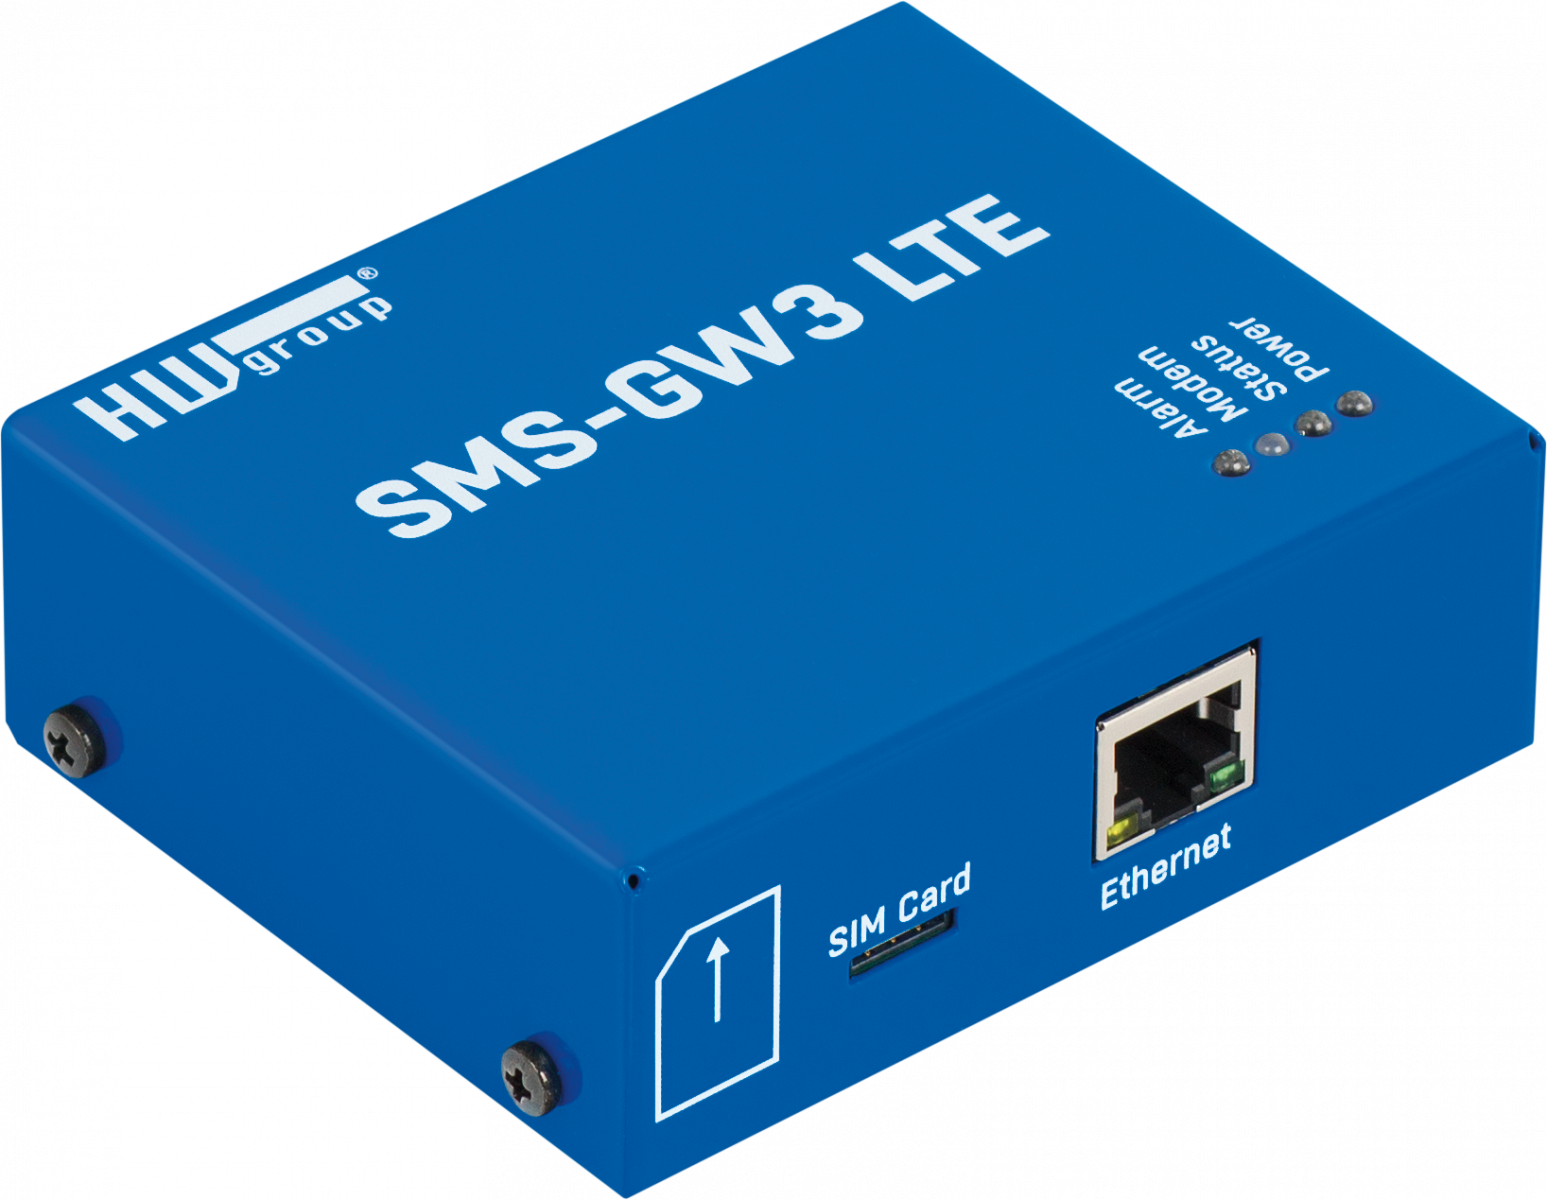 HWg SMS-GW3 LTE Gateway | LTE-M routers, Slimme industriemonitoring, Slimme temperatuur monitoring, Wifi Sensoring | Product | MCS